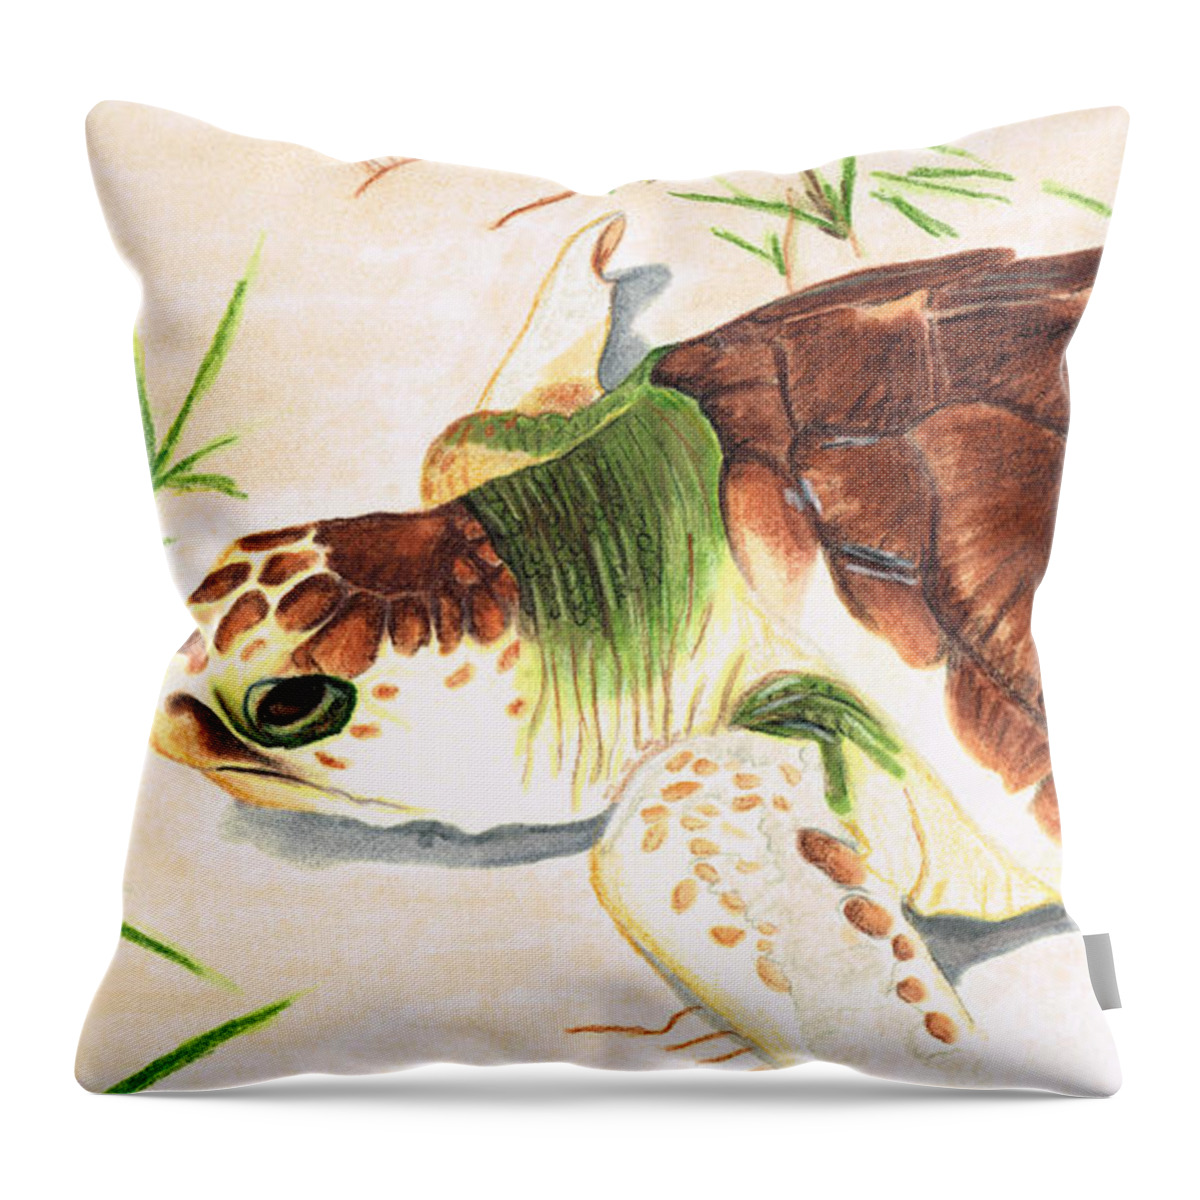 Sea Turtle Throw Pillow featuring the painting Sea Turtle Art By Sharon Cummings by Sharon Cummings